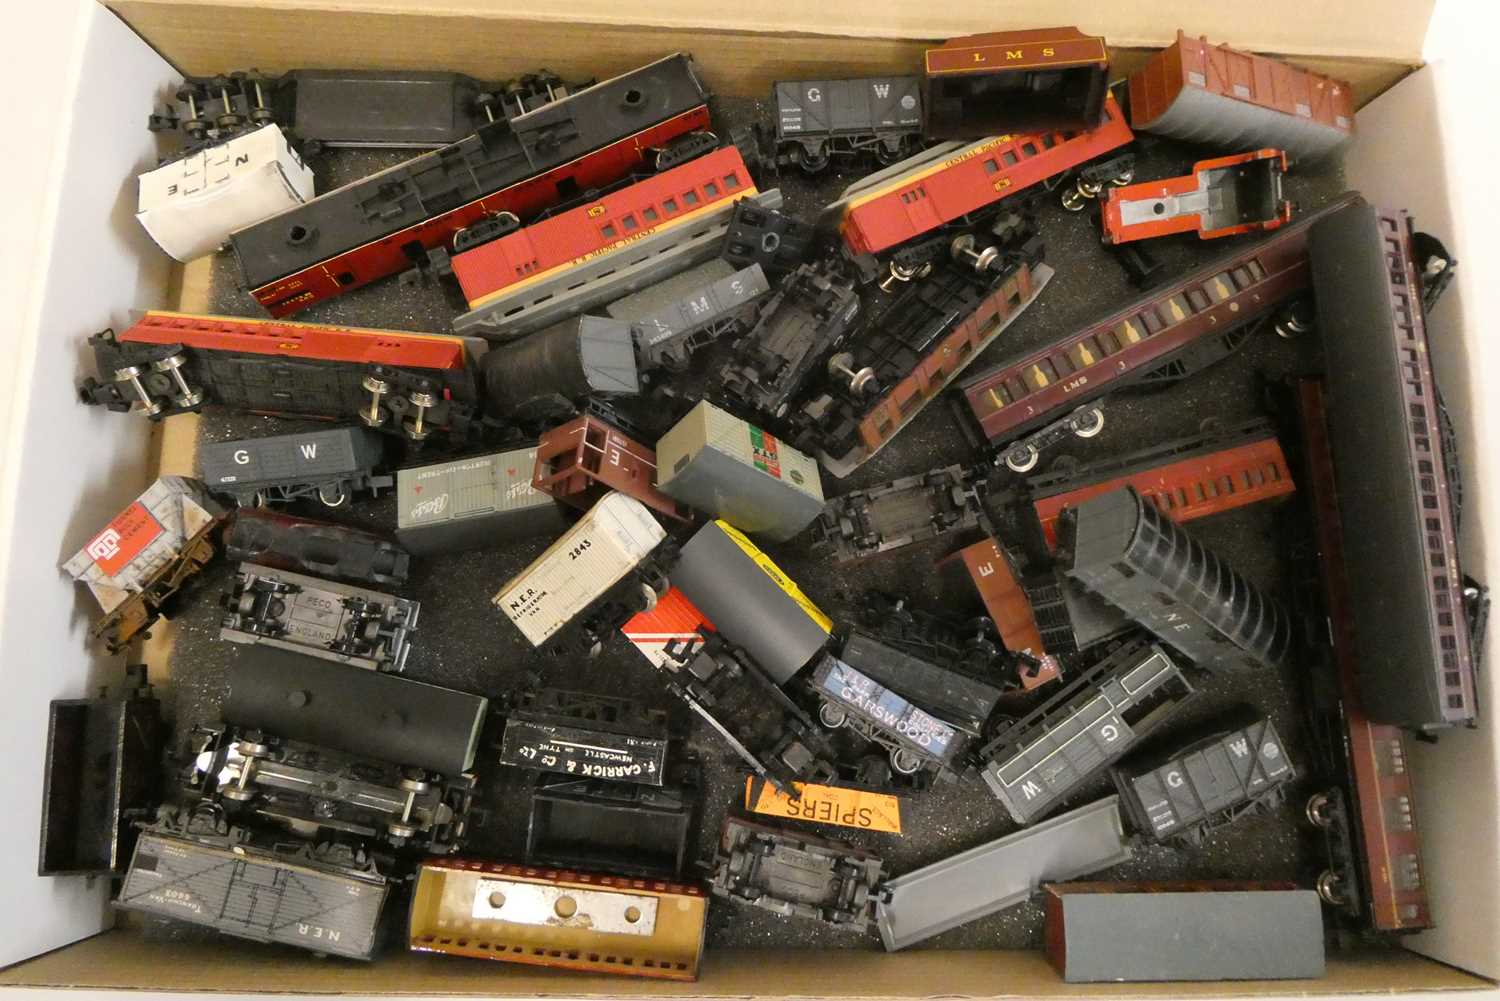 Unboxed playworn N gauge rolling stock and trackside accessories, some items have damage or parts - Image 2 of 2